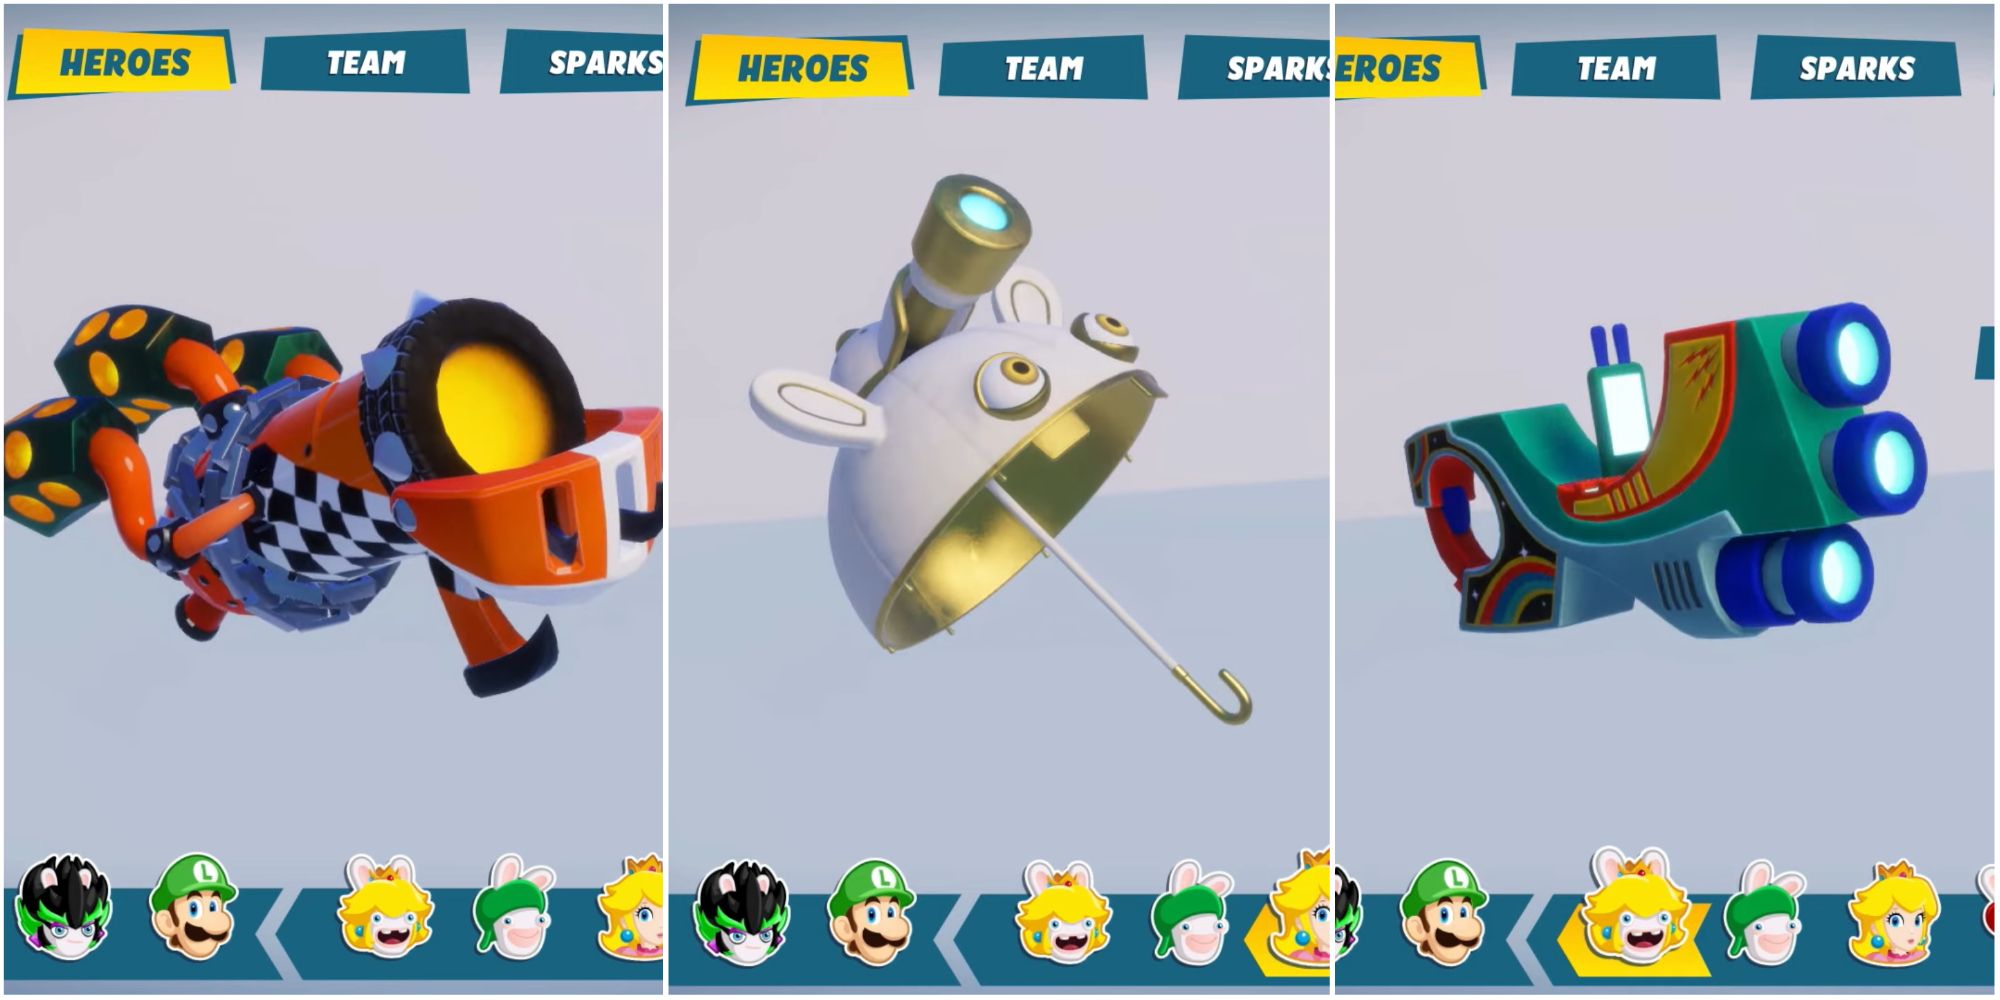 Mario Rabbids Sparks of Hope Weapon Skins Featured Speedway Bowzooka Gleaming Boom-Brella Vintage Triple Troll